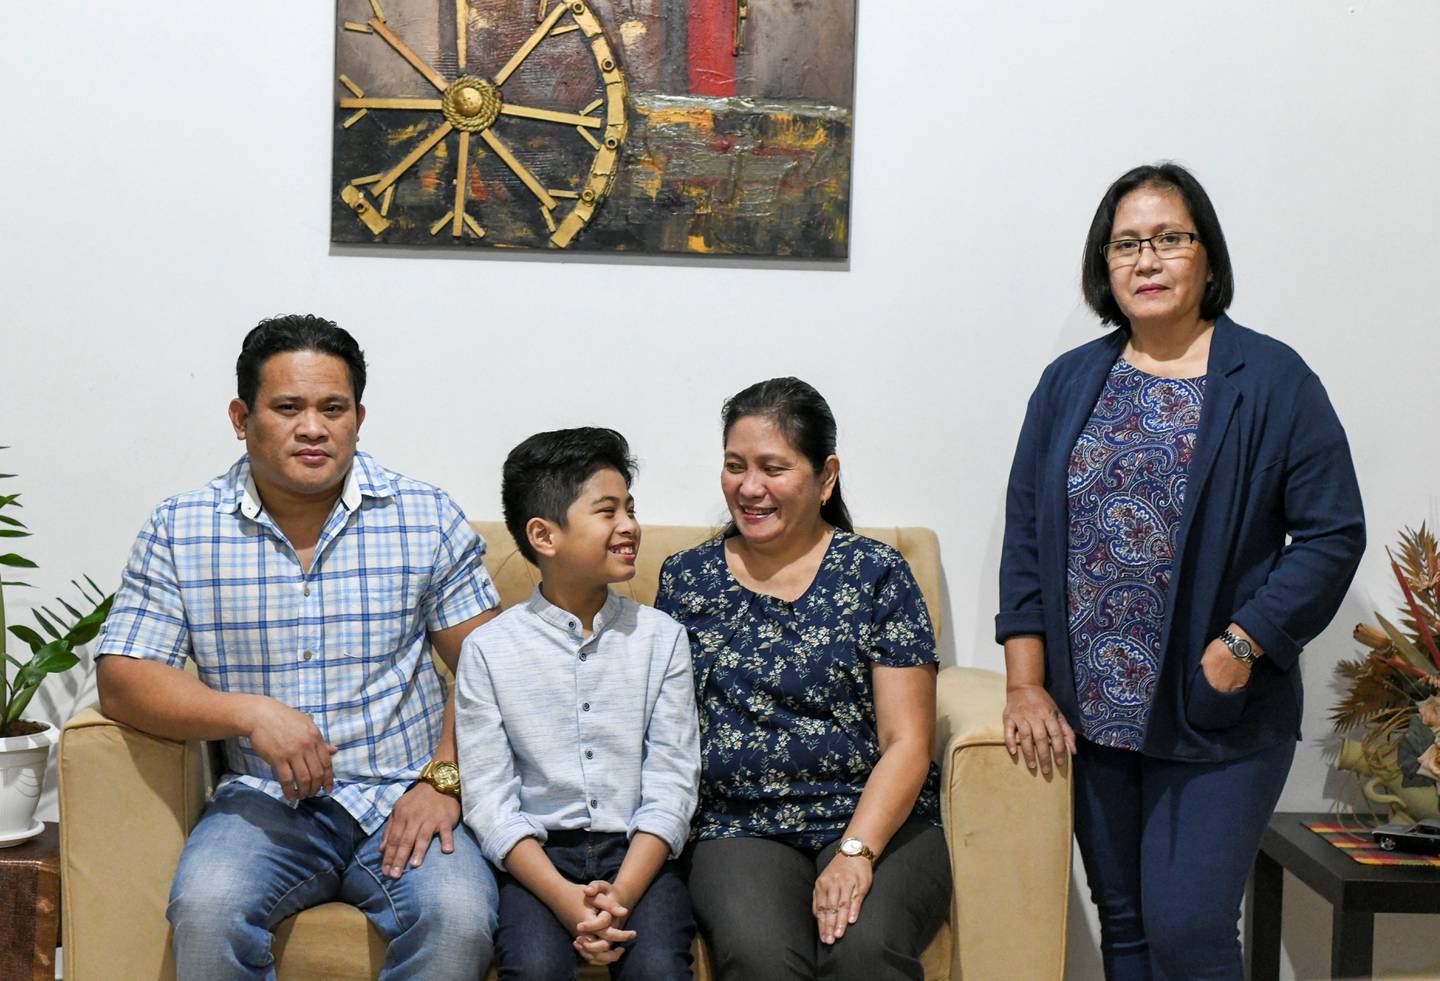 Peter Rosalita-AD  Peter Rosalita, 10, with his parents Ruel Rosalita, Vilma Villegas, and aunt Mary Jane Villegas in Abu Dhabi on June 7, 2021.
Reporter: David Tusing Features
